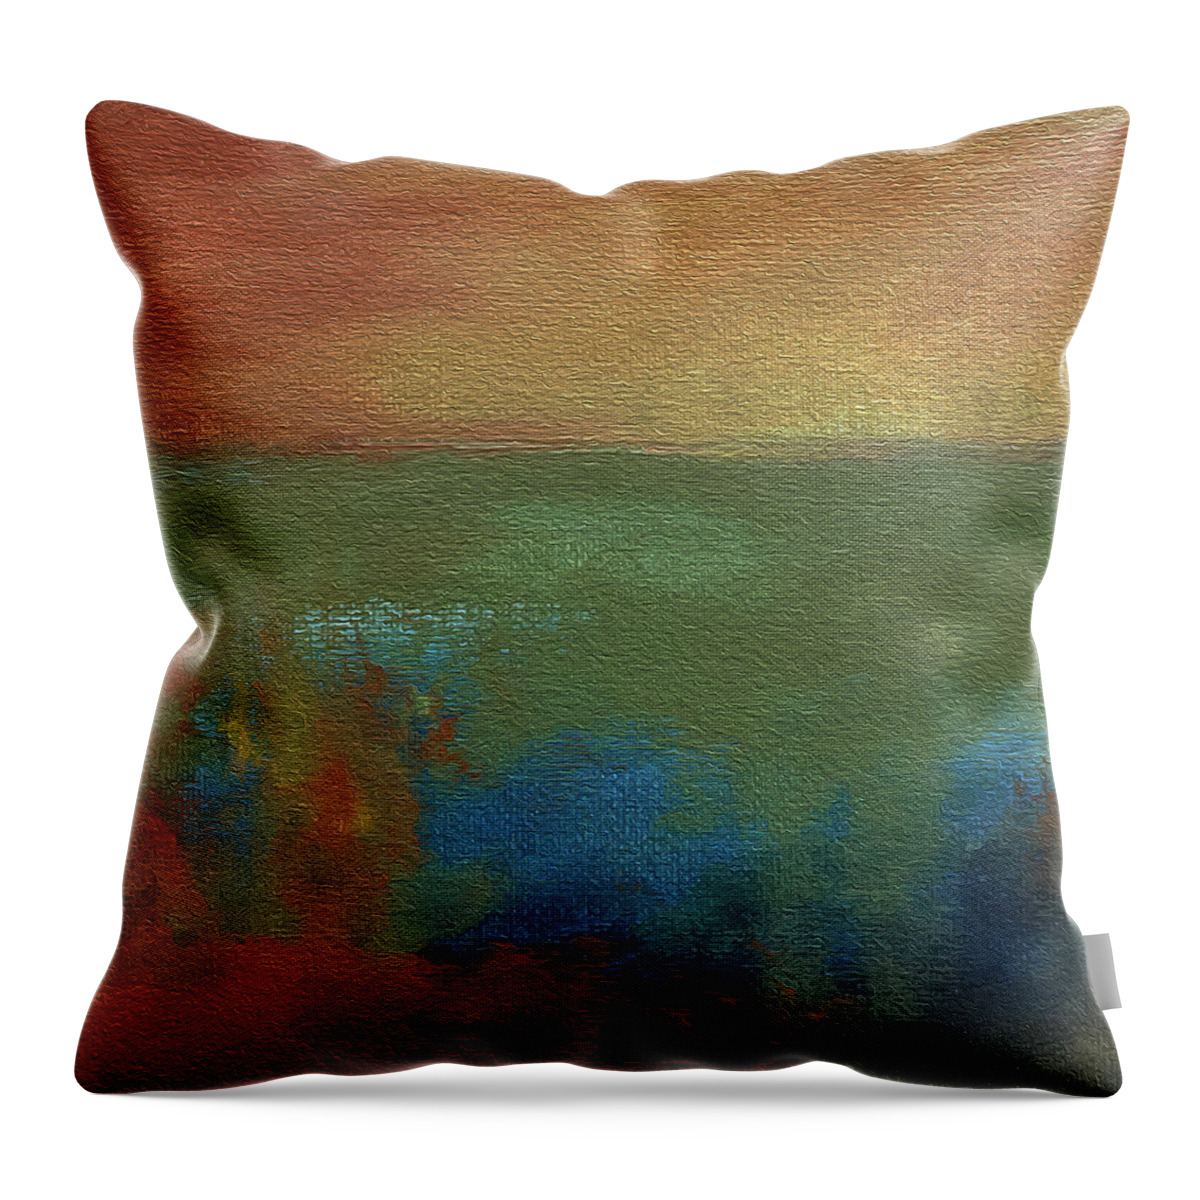 Landscape Throw Pillow featuring the mixed media Earthy by Linda Bailey